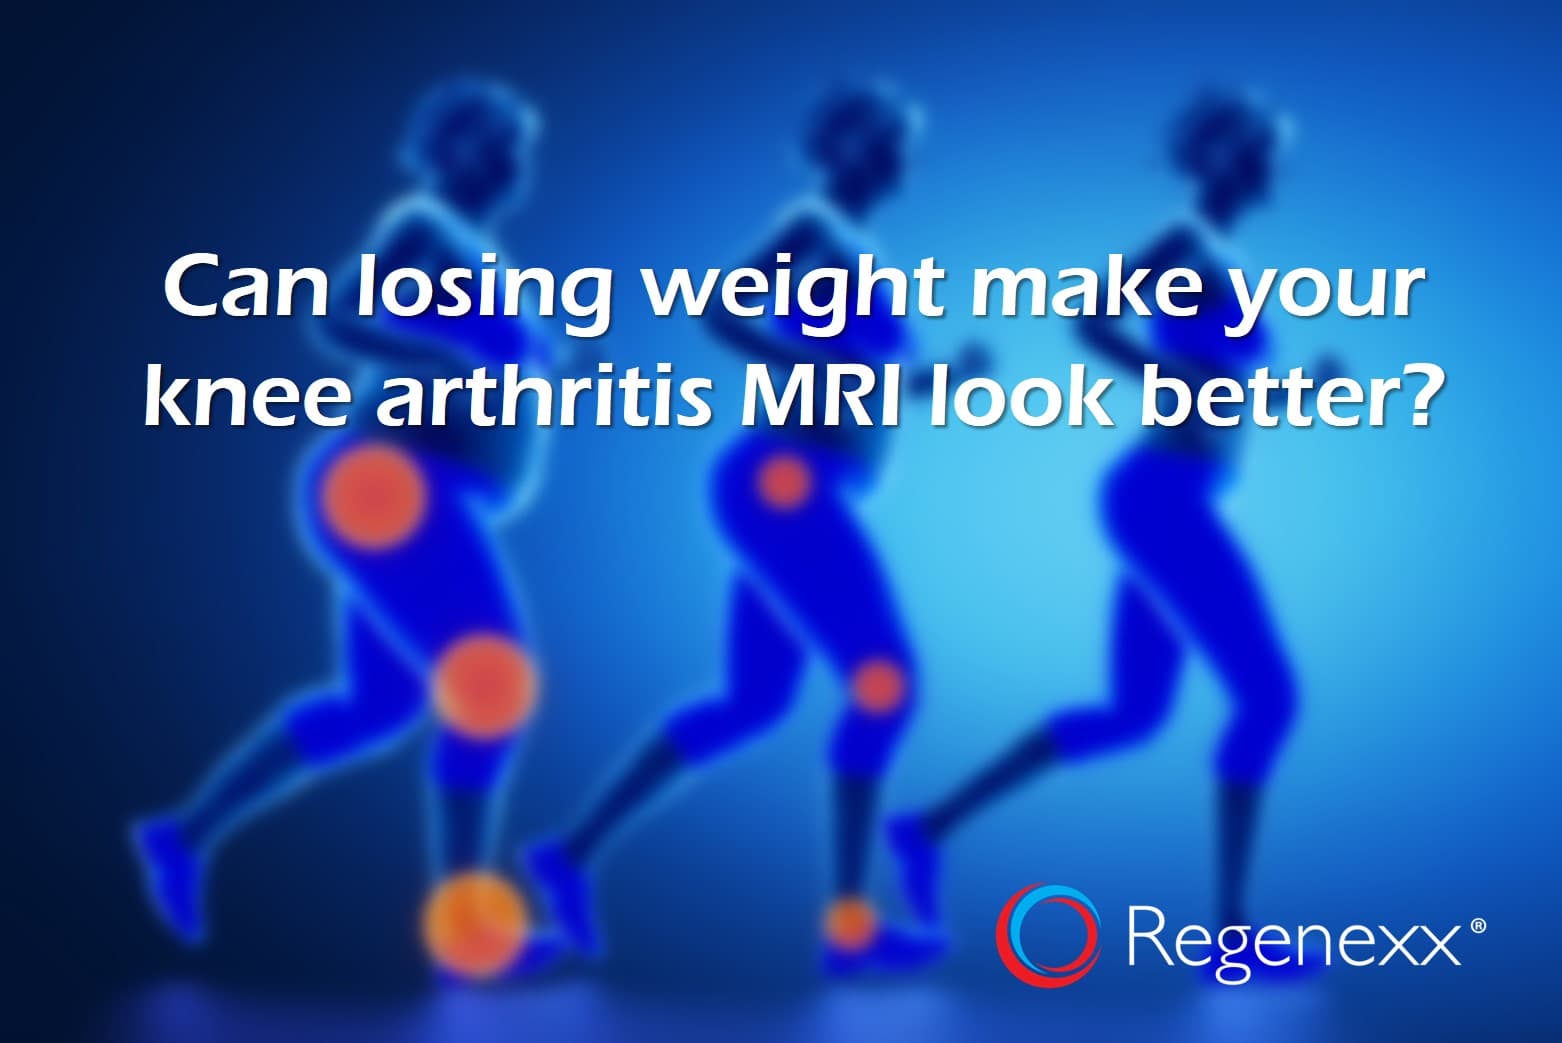 Does Weight Loss Help Knee Pain and Arthritis?